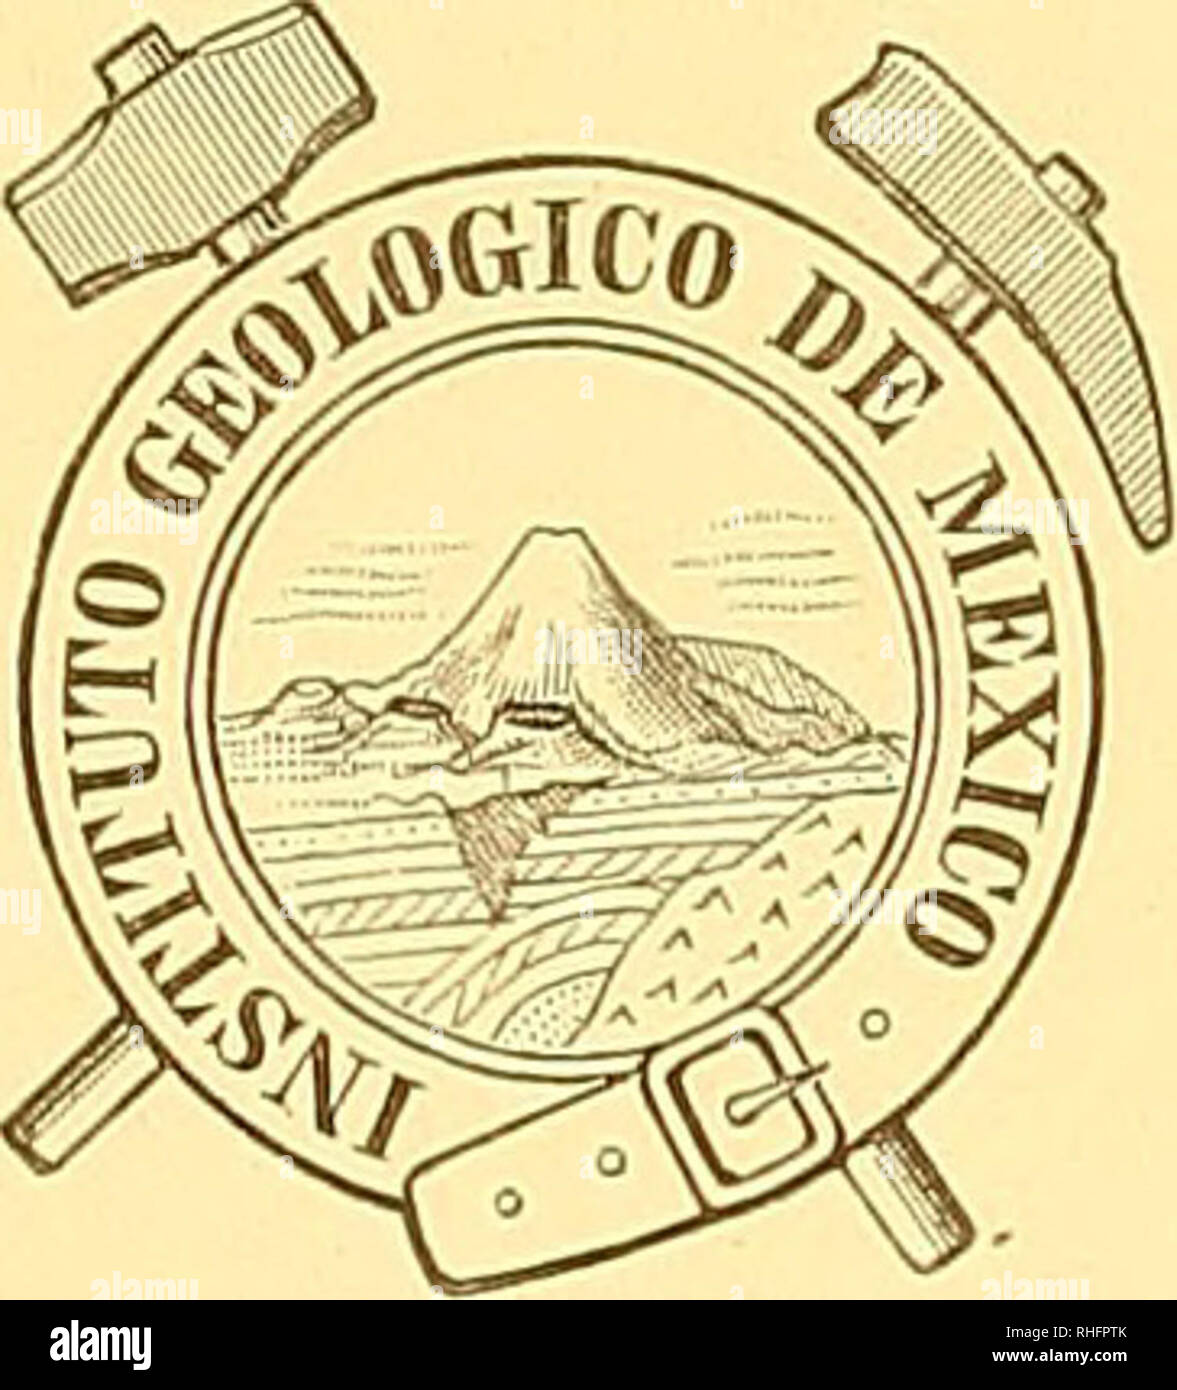 . Boletín del Instituto Geológico de México. Geology; Geology; Paleontology. lasrSTITTJTO (3-:E0X.0(3-IC0 JDIBU IvdlEXlICO. Director, José G. Aguilera. EL REAL DEL MONTE EZEQUIEL ORDOÑEZ Y MANUEL RANGEL.. MÉXICO OFICINA TIP. DE LA SECRETARIA DE FOMENTO Calle de San Andrés numero 15. 1899. Please note that these images are extracted from scanned page images that may have been digitally enhanced for readability - coloration and appearance of these illustrations may not perfectly resemble the original work.. Instituto Geológico de México. México : [Instituto] Stock Photo